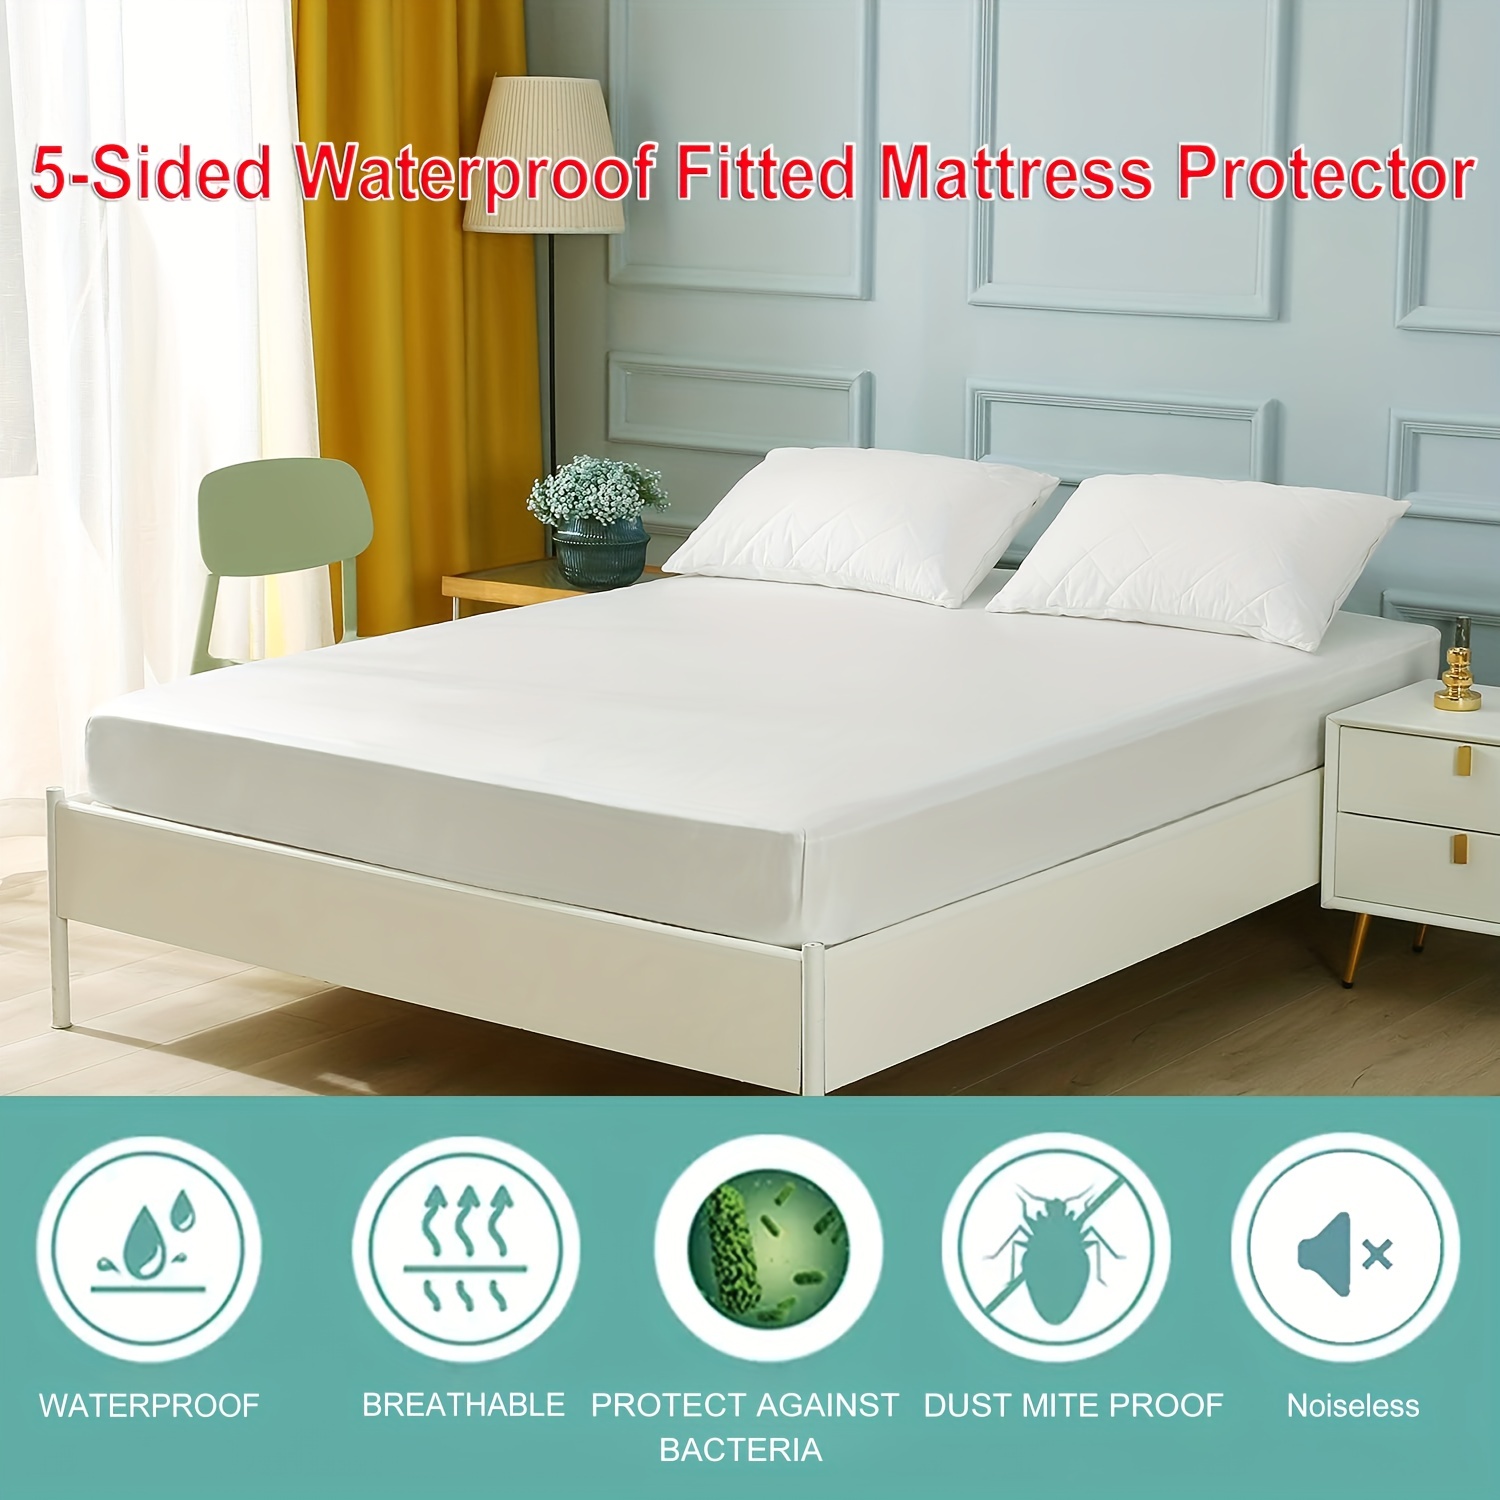 Waterproof Mattress Topper Cover Breathable Elastic Rubber Band Sheet  Mattress Pad Protector Cover Anti Mites Bed Fitted Sheet